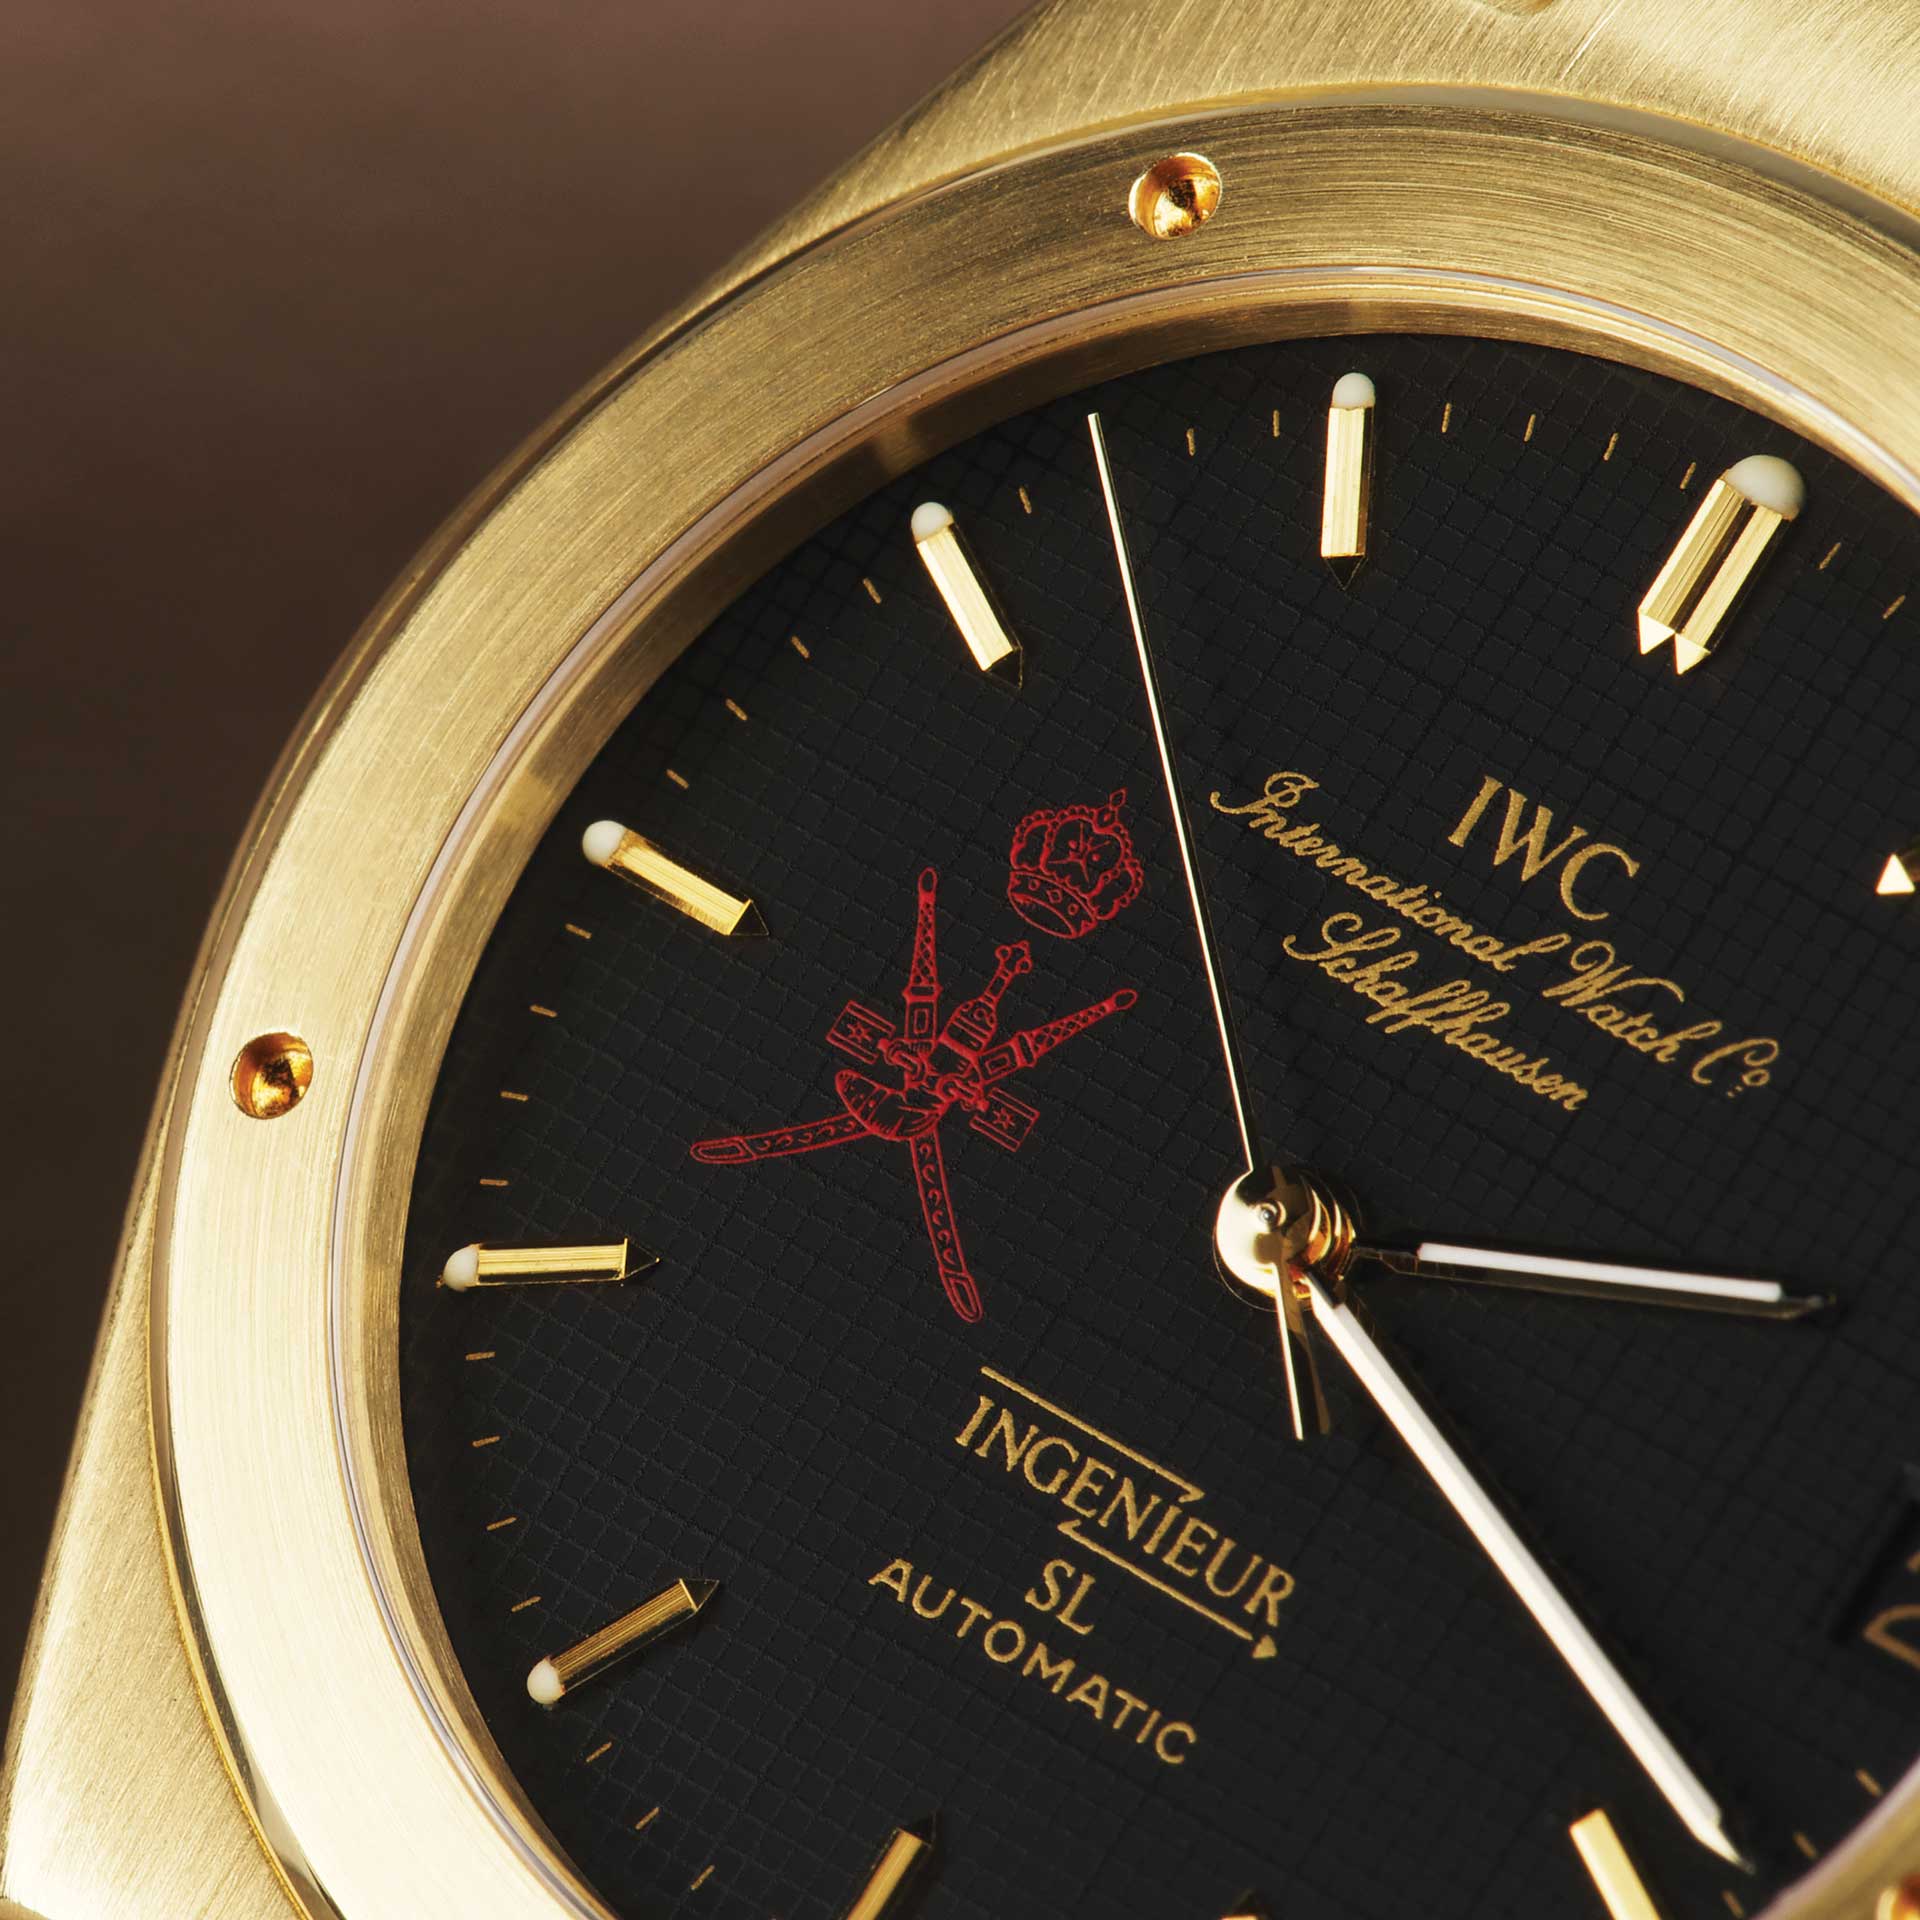 iwc watches on sale